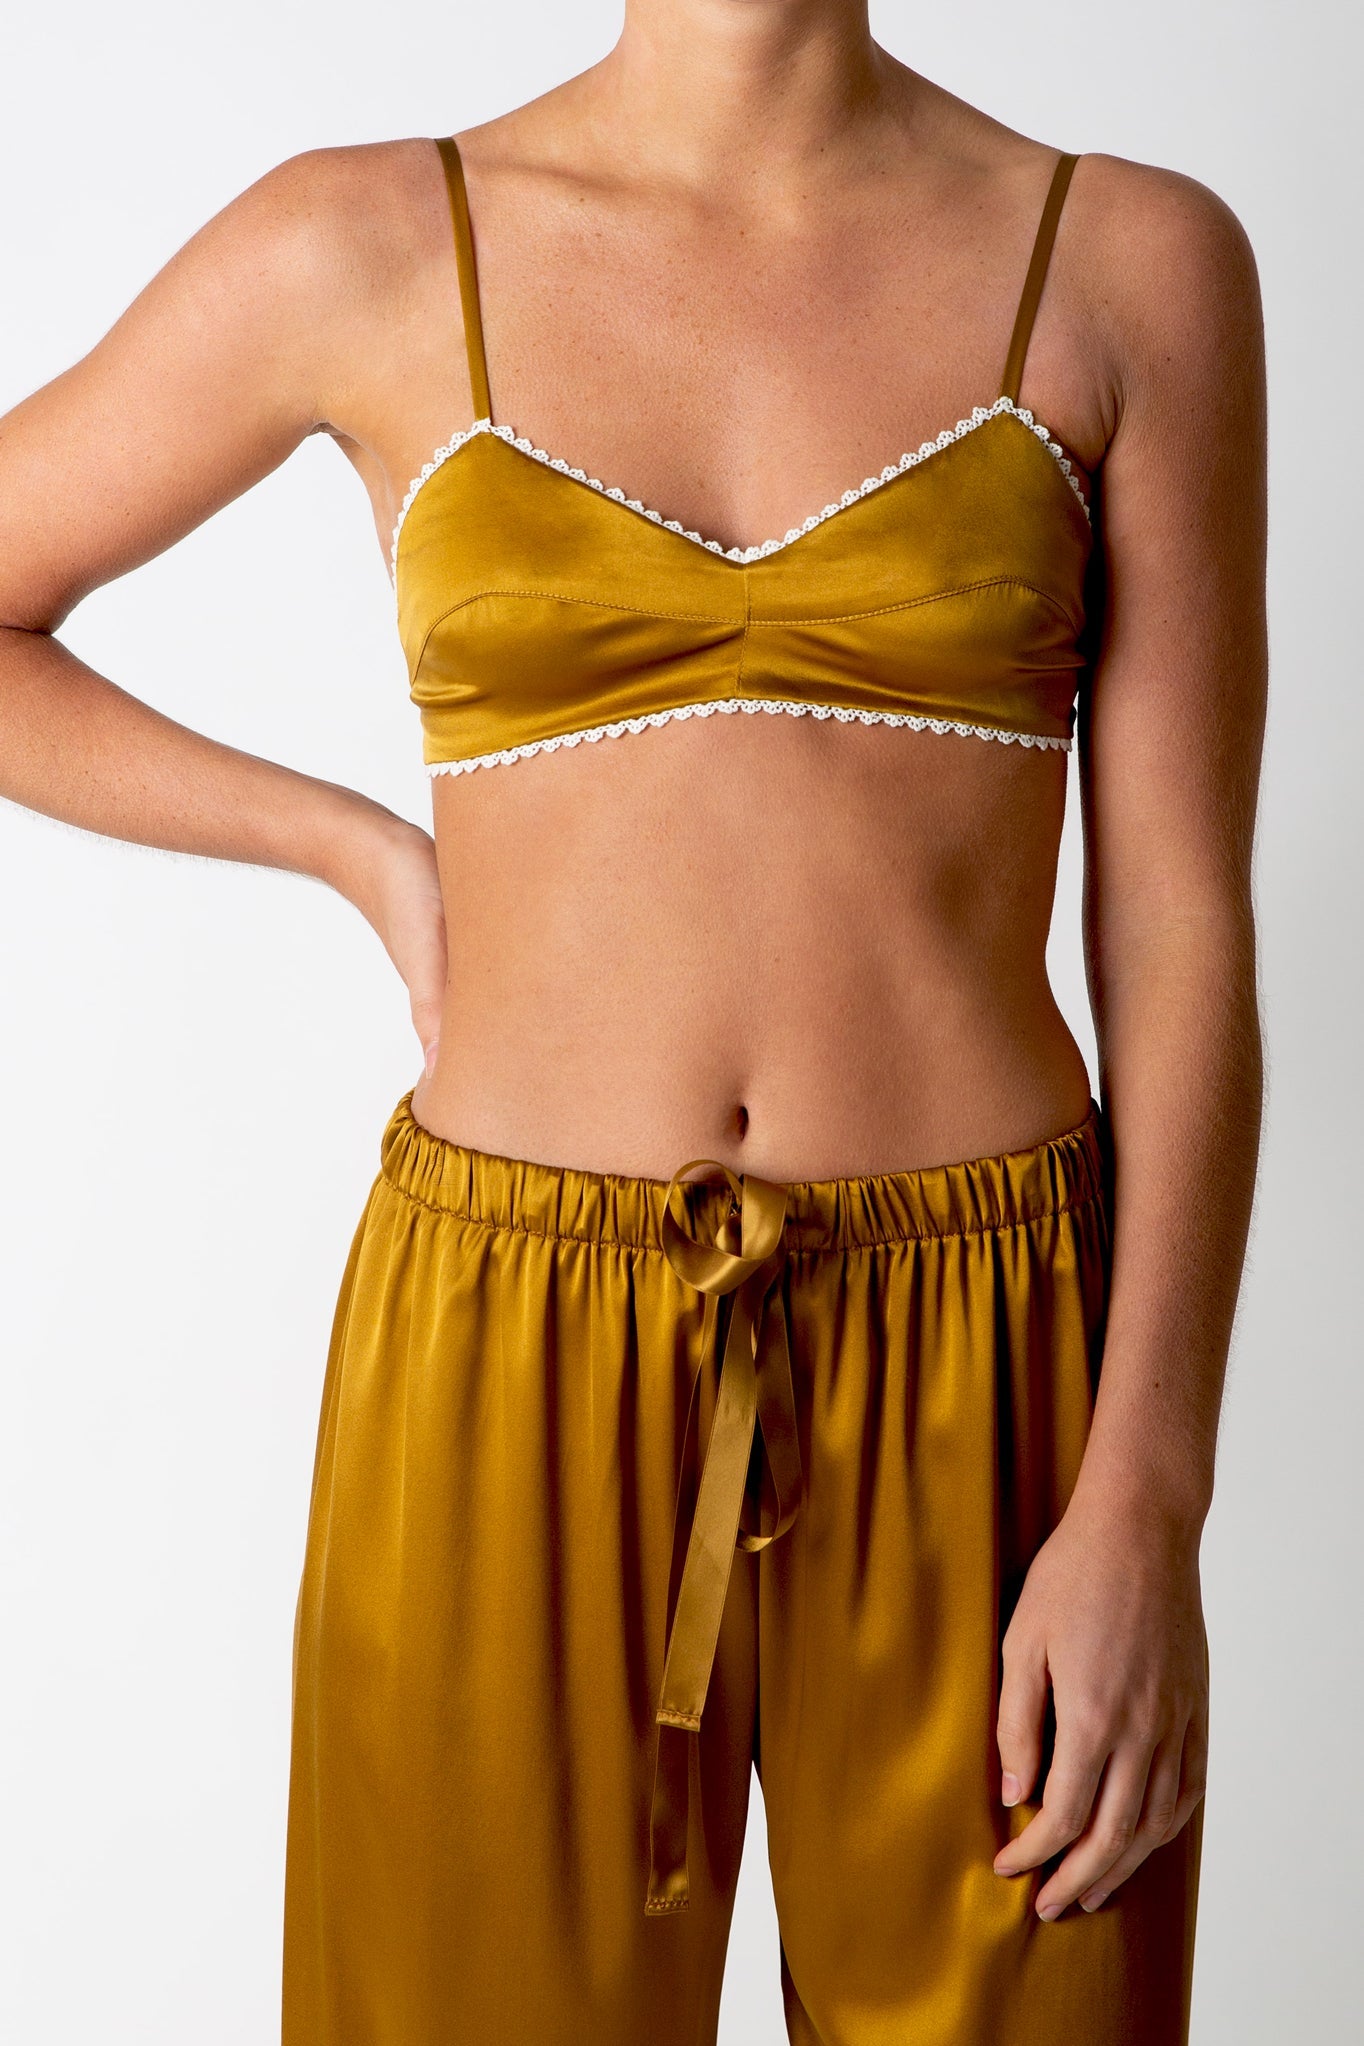 Silk Bralette - Gold by Miguelina